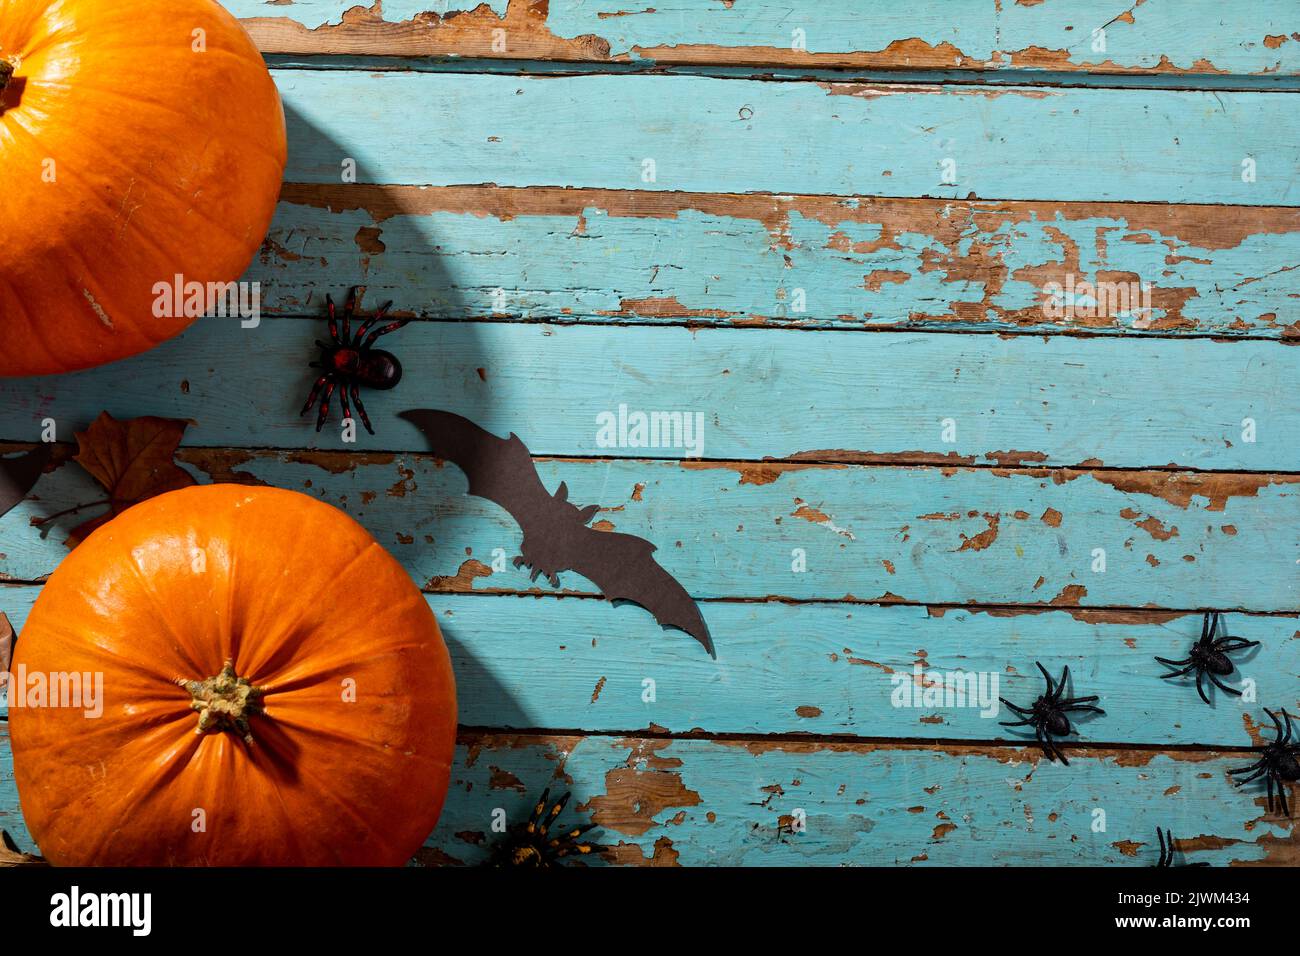 Pumpkins, spider and bat toys with copy space on blue wooden surface Stock Photo